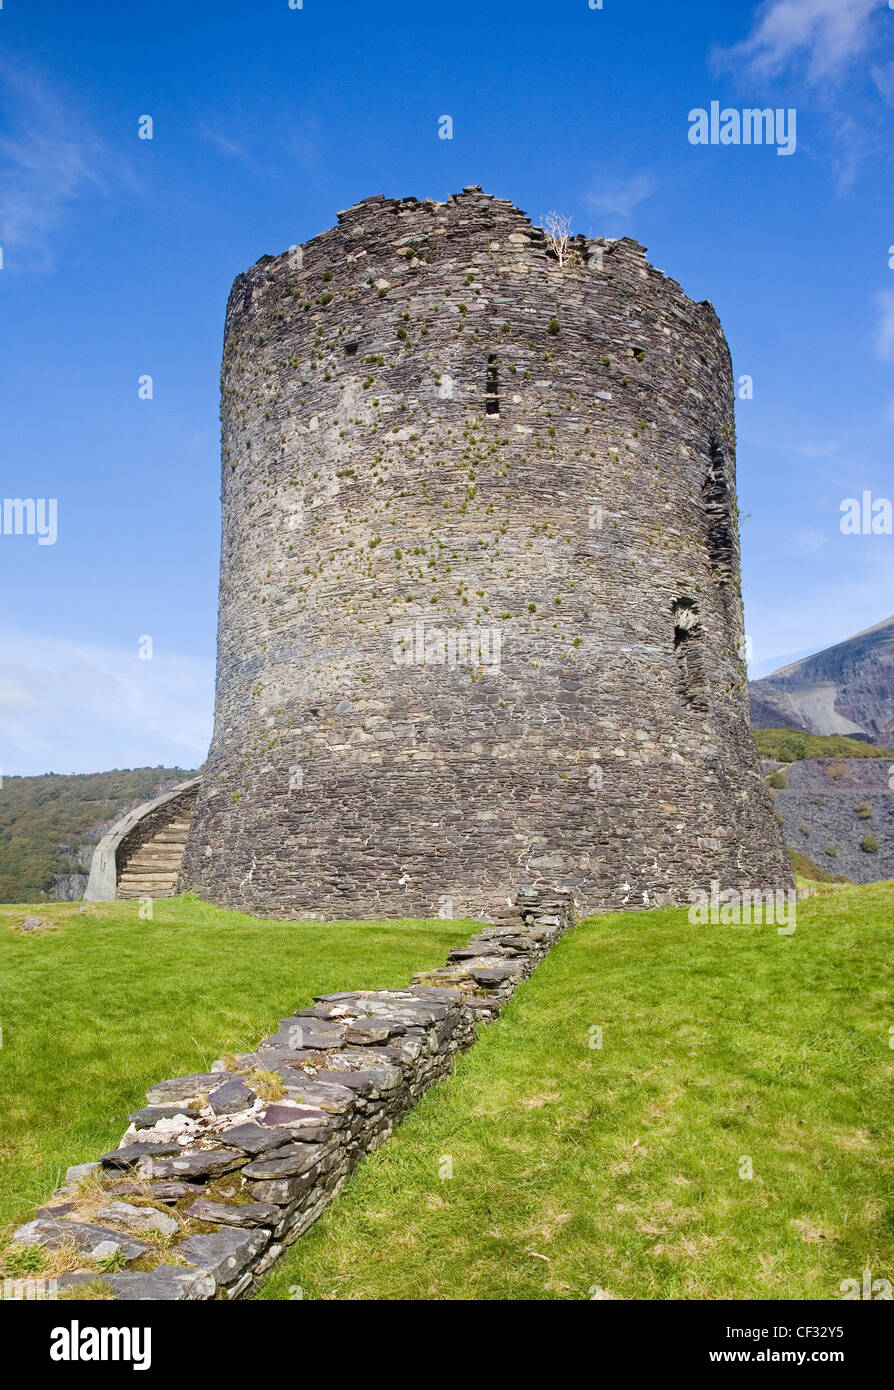 The Great Tower of Dolbadarn castle built by Llywelyn ap Iorwerth (Llywelyn the Great) around 1230, one Wales' finest native-bui Stock Photo